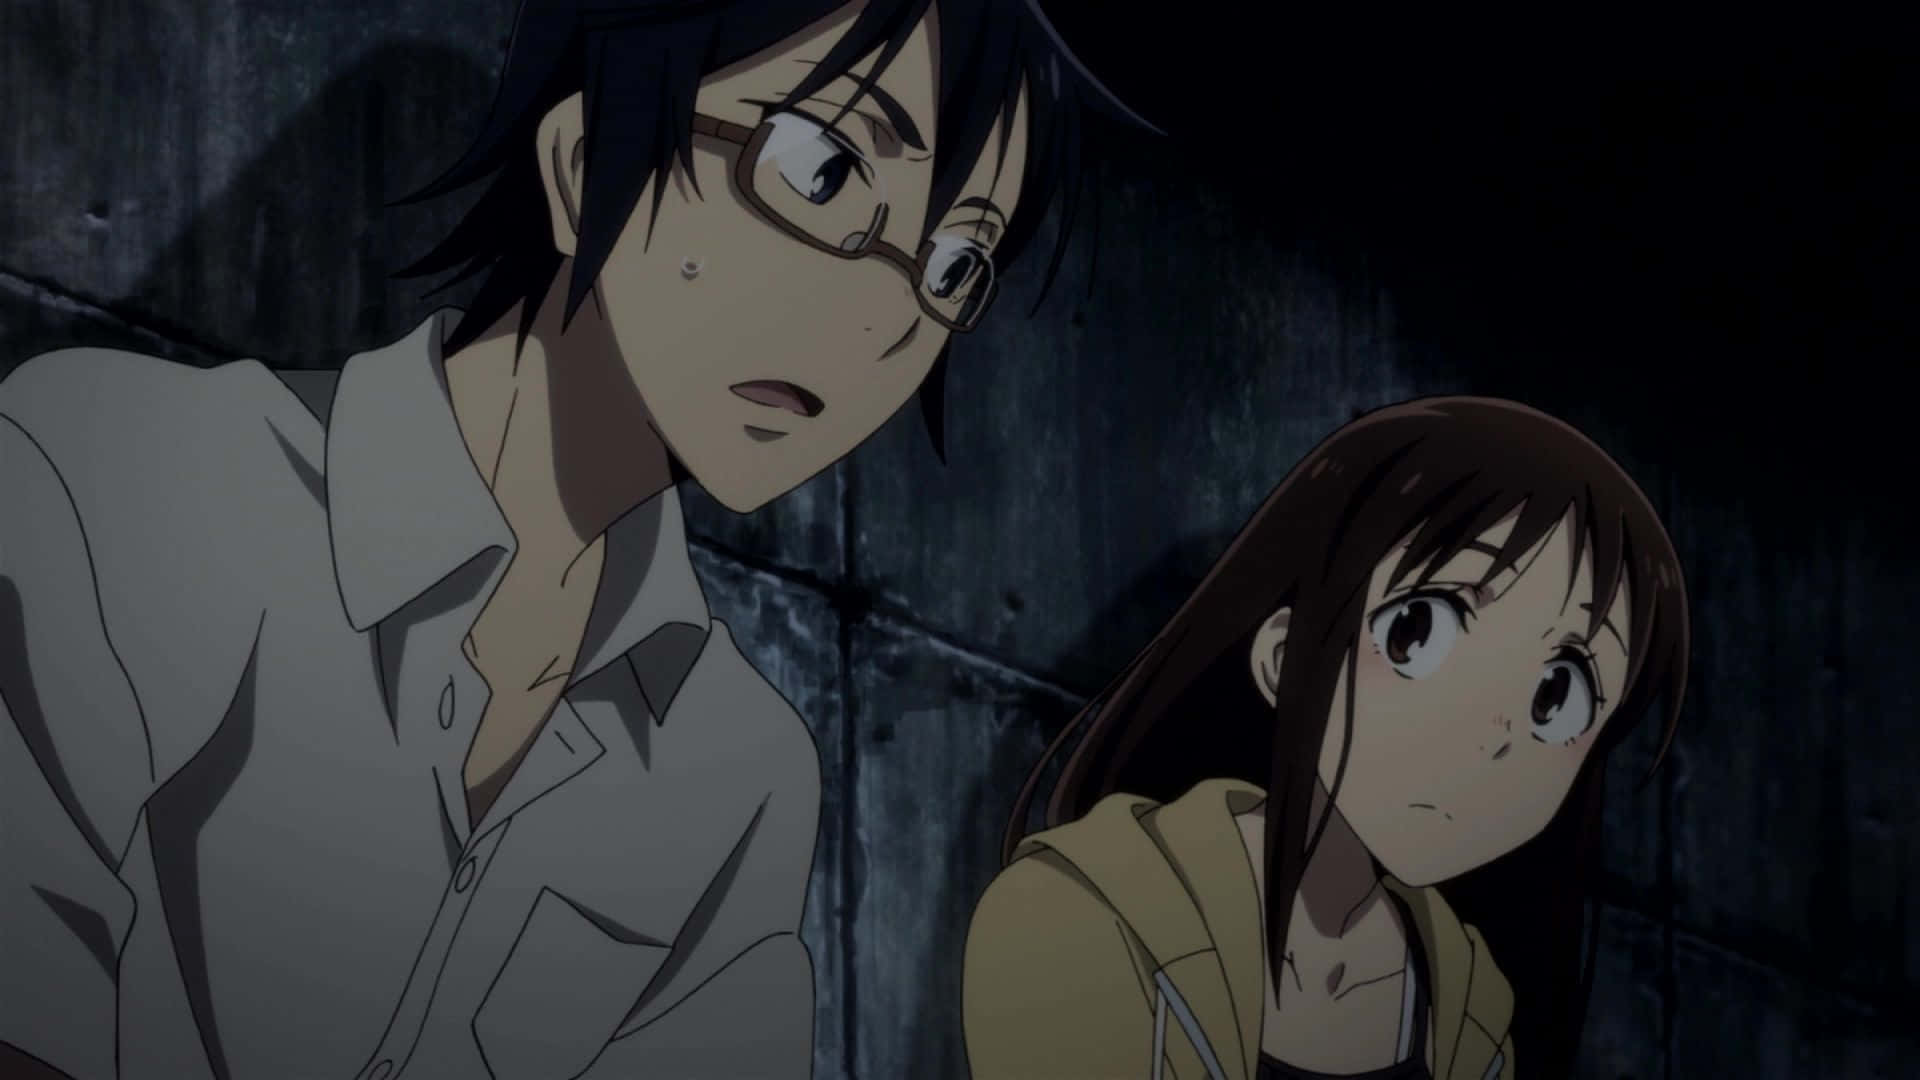 A still from the thriller anime "Erased"